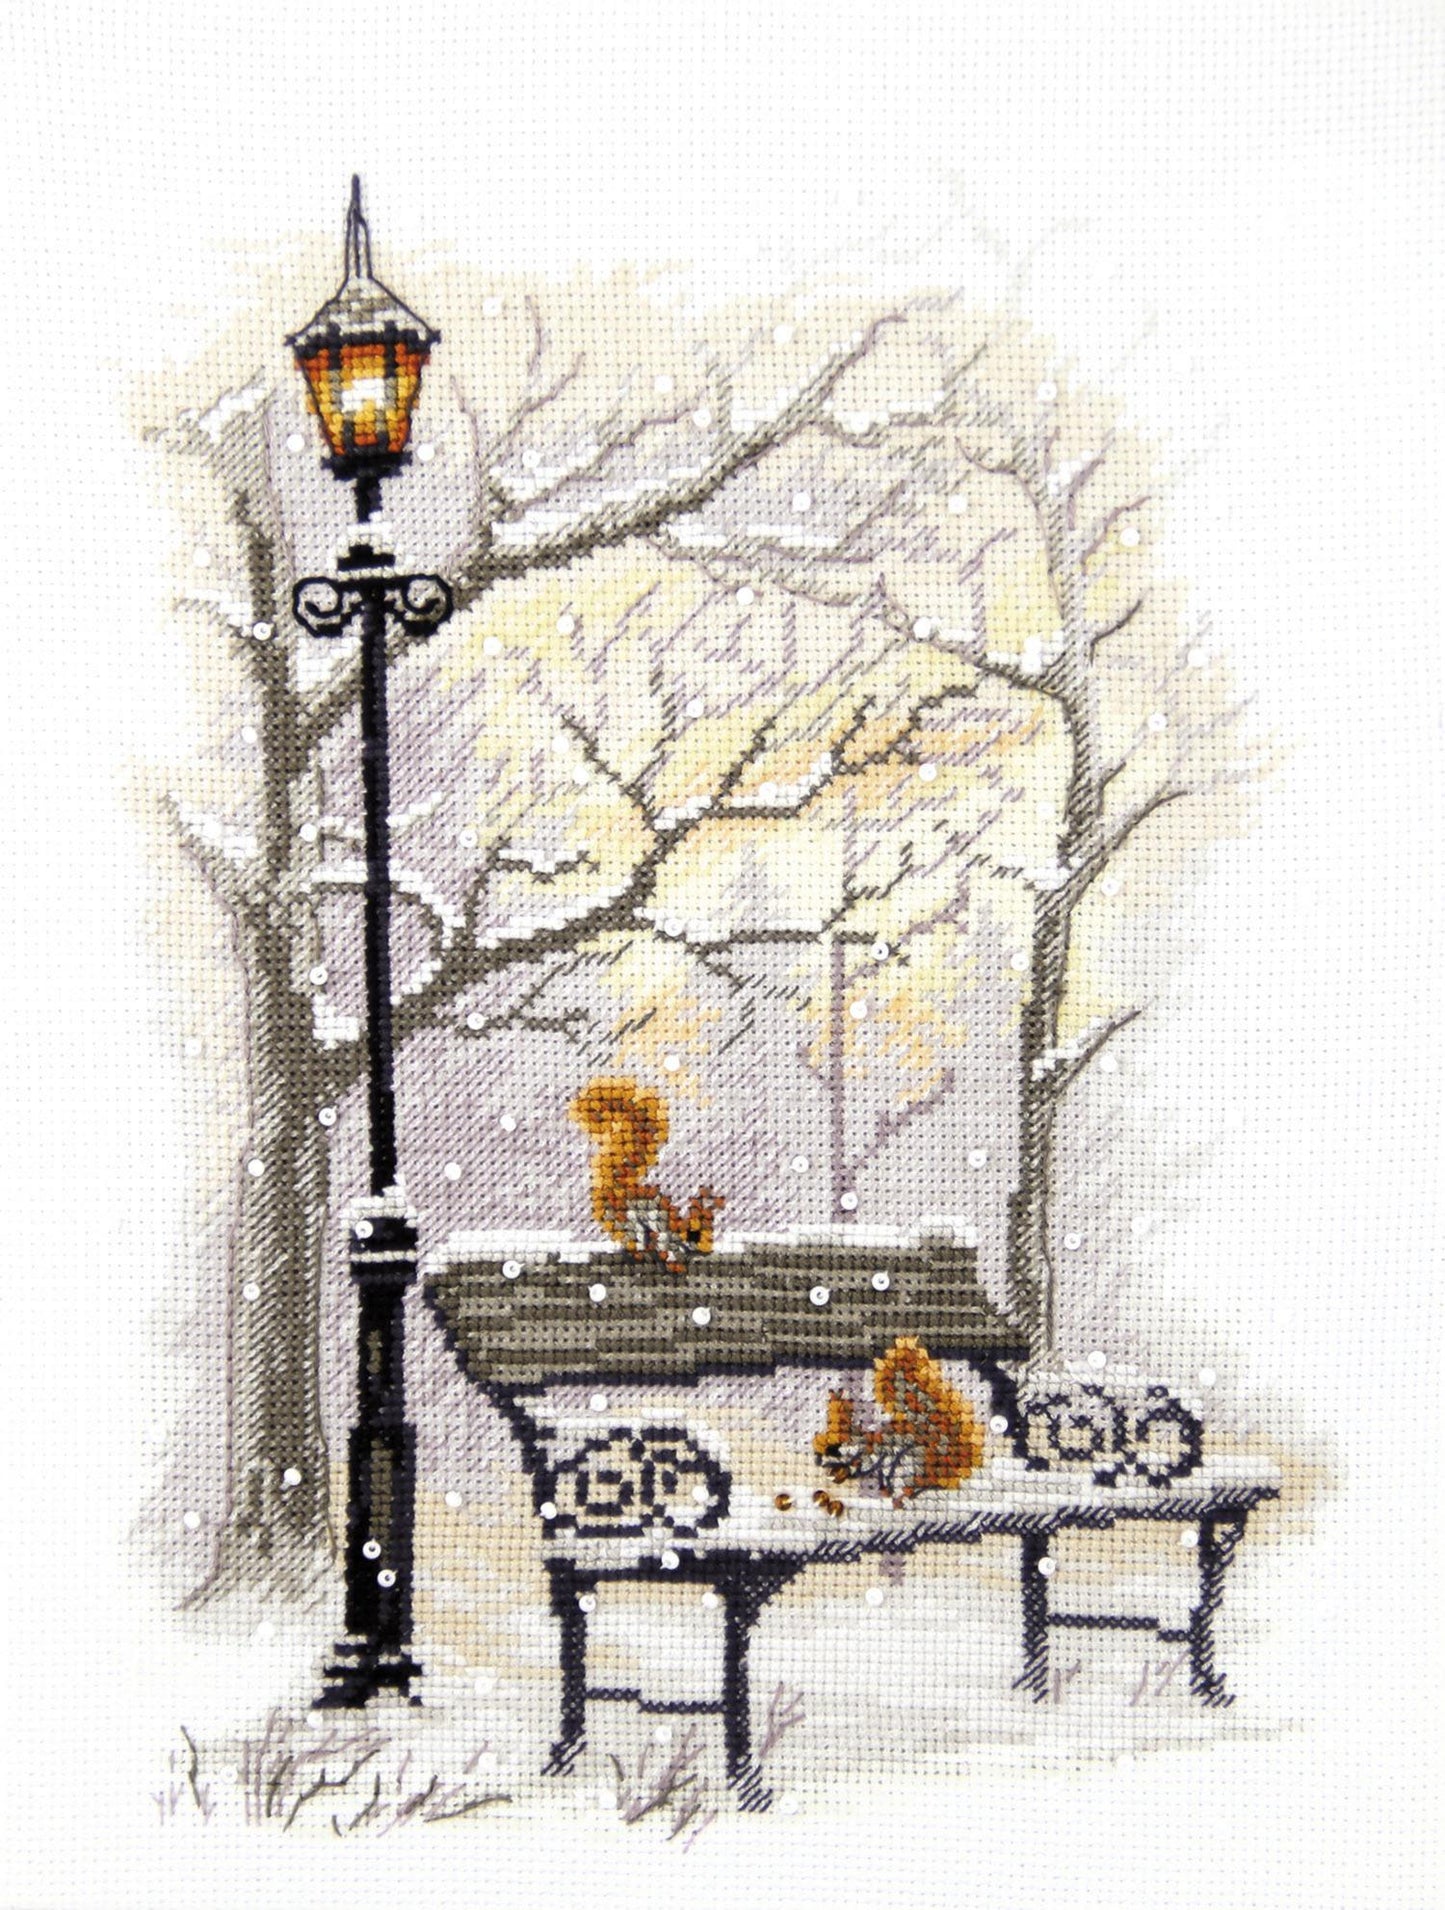 IN THE WINTER PARK, Counted Cross Stitch Kit, 16 count Aida, size 19 x 25 cm, Charivna mit | Momentos Magicos (M-420)